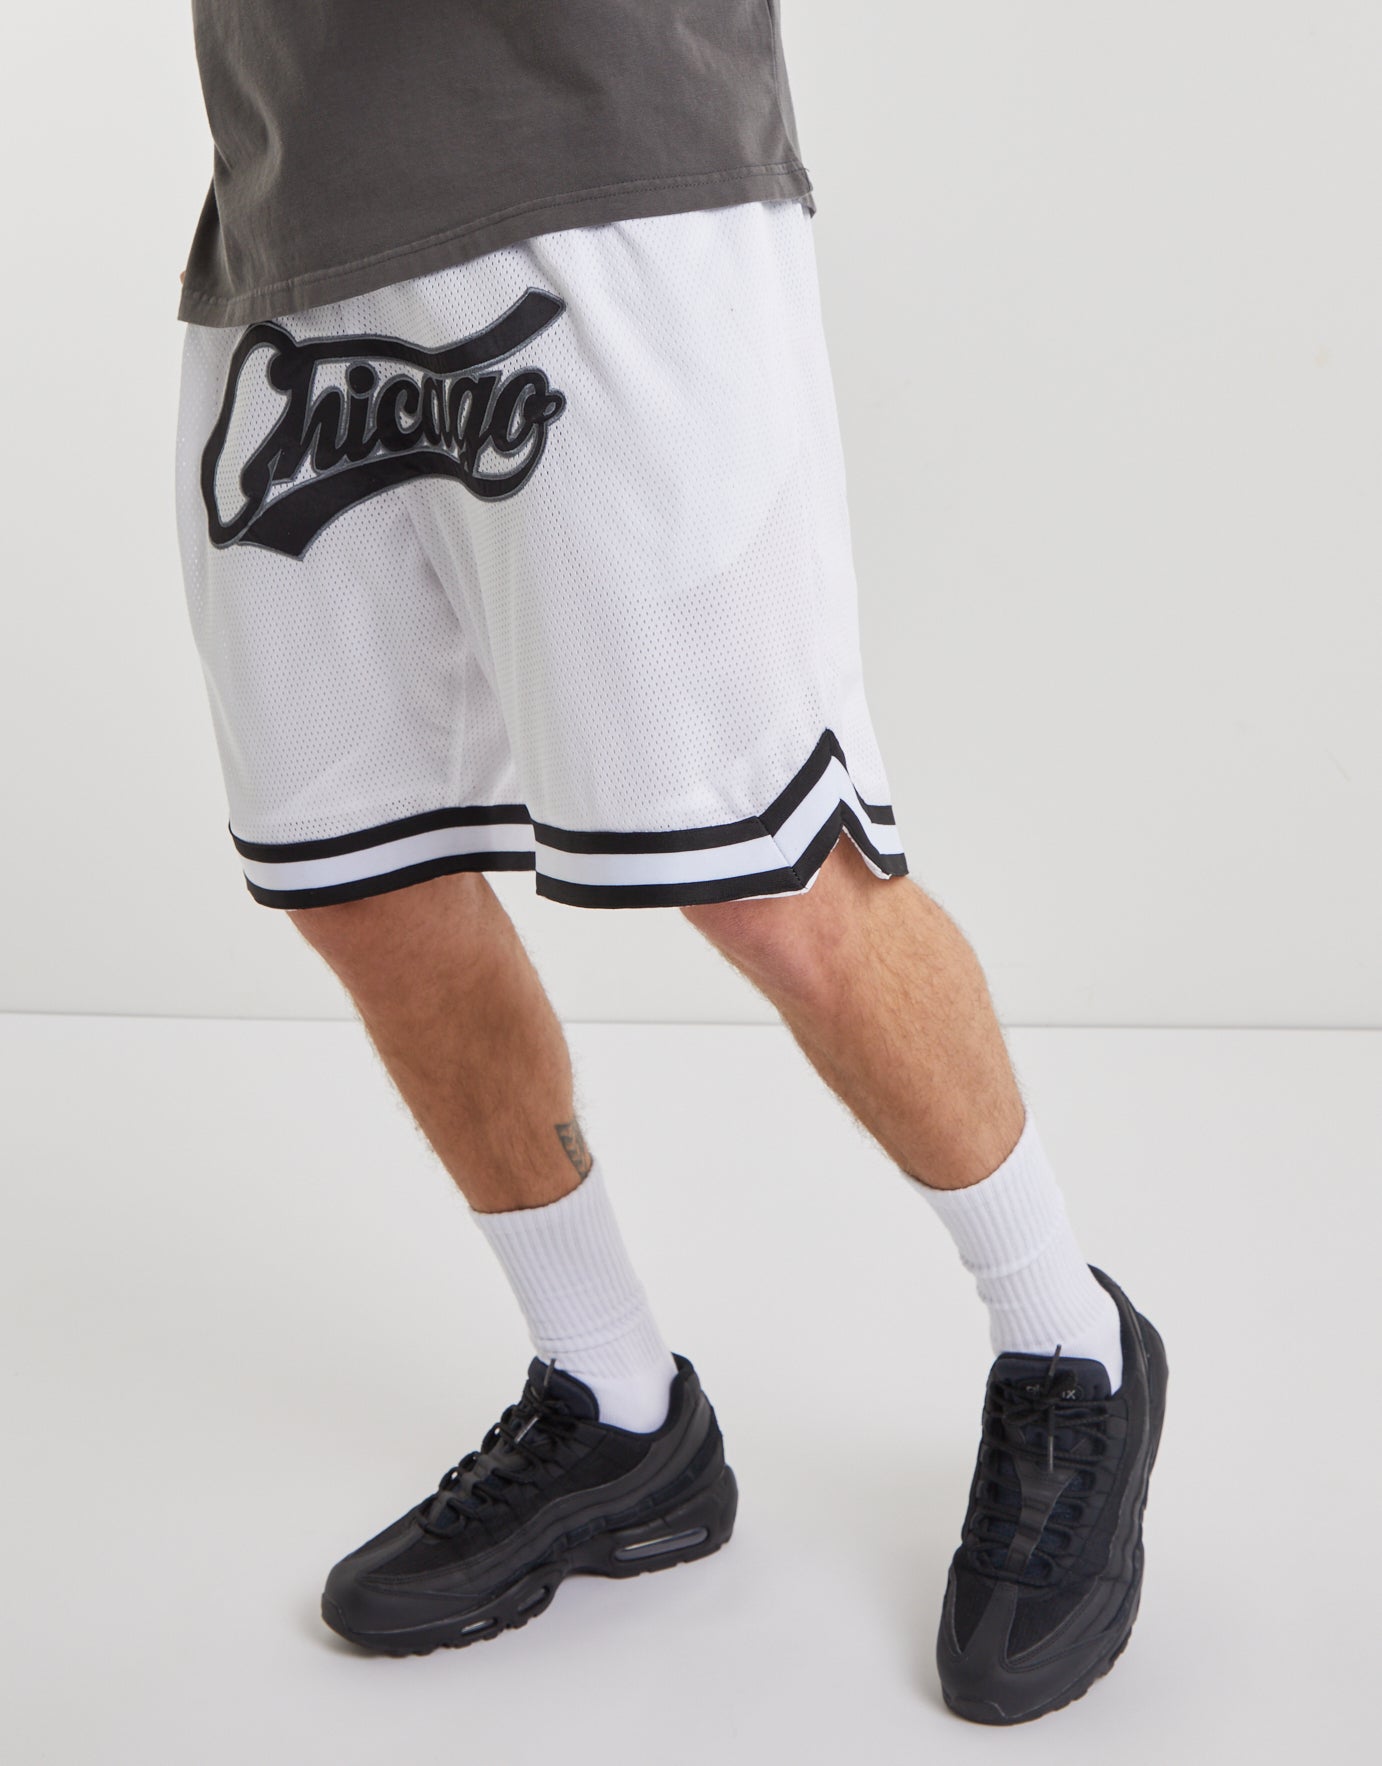 Mesh Shorts With Built-in Liner | SoftStretch Basketball Shorts | Jambys |  Block Party